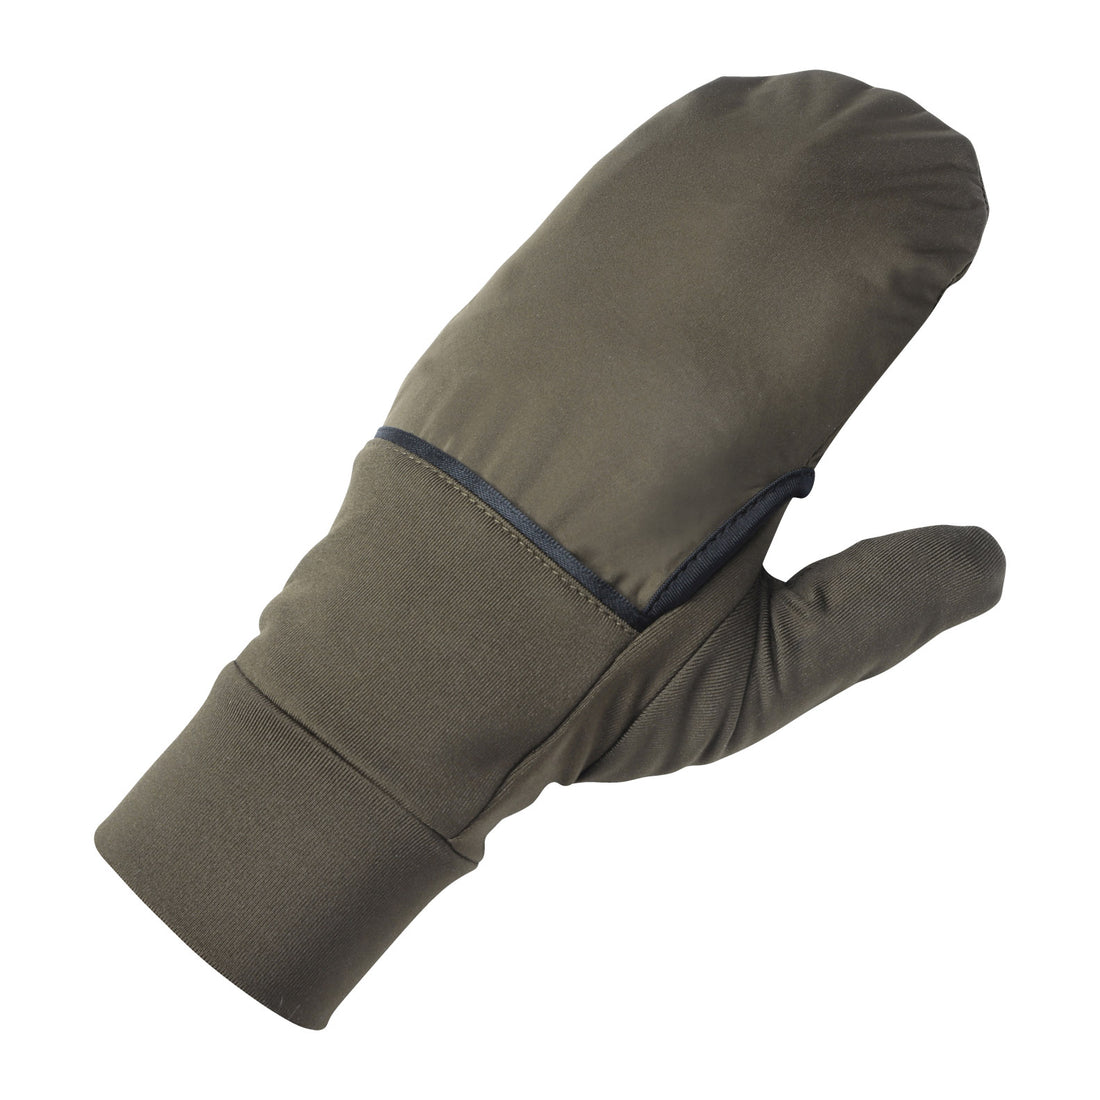 Verney-Carron-tactile-Glove/Mittens